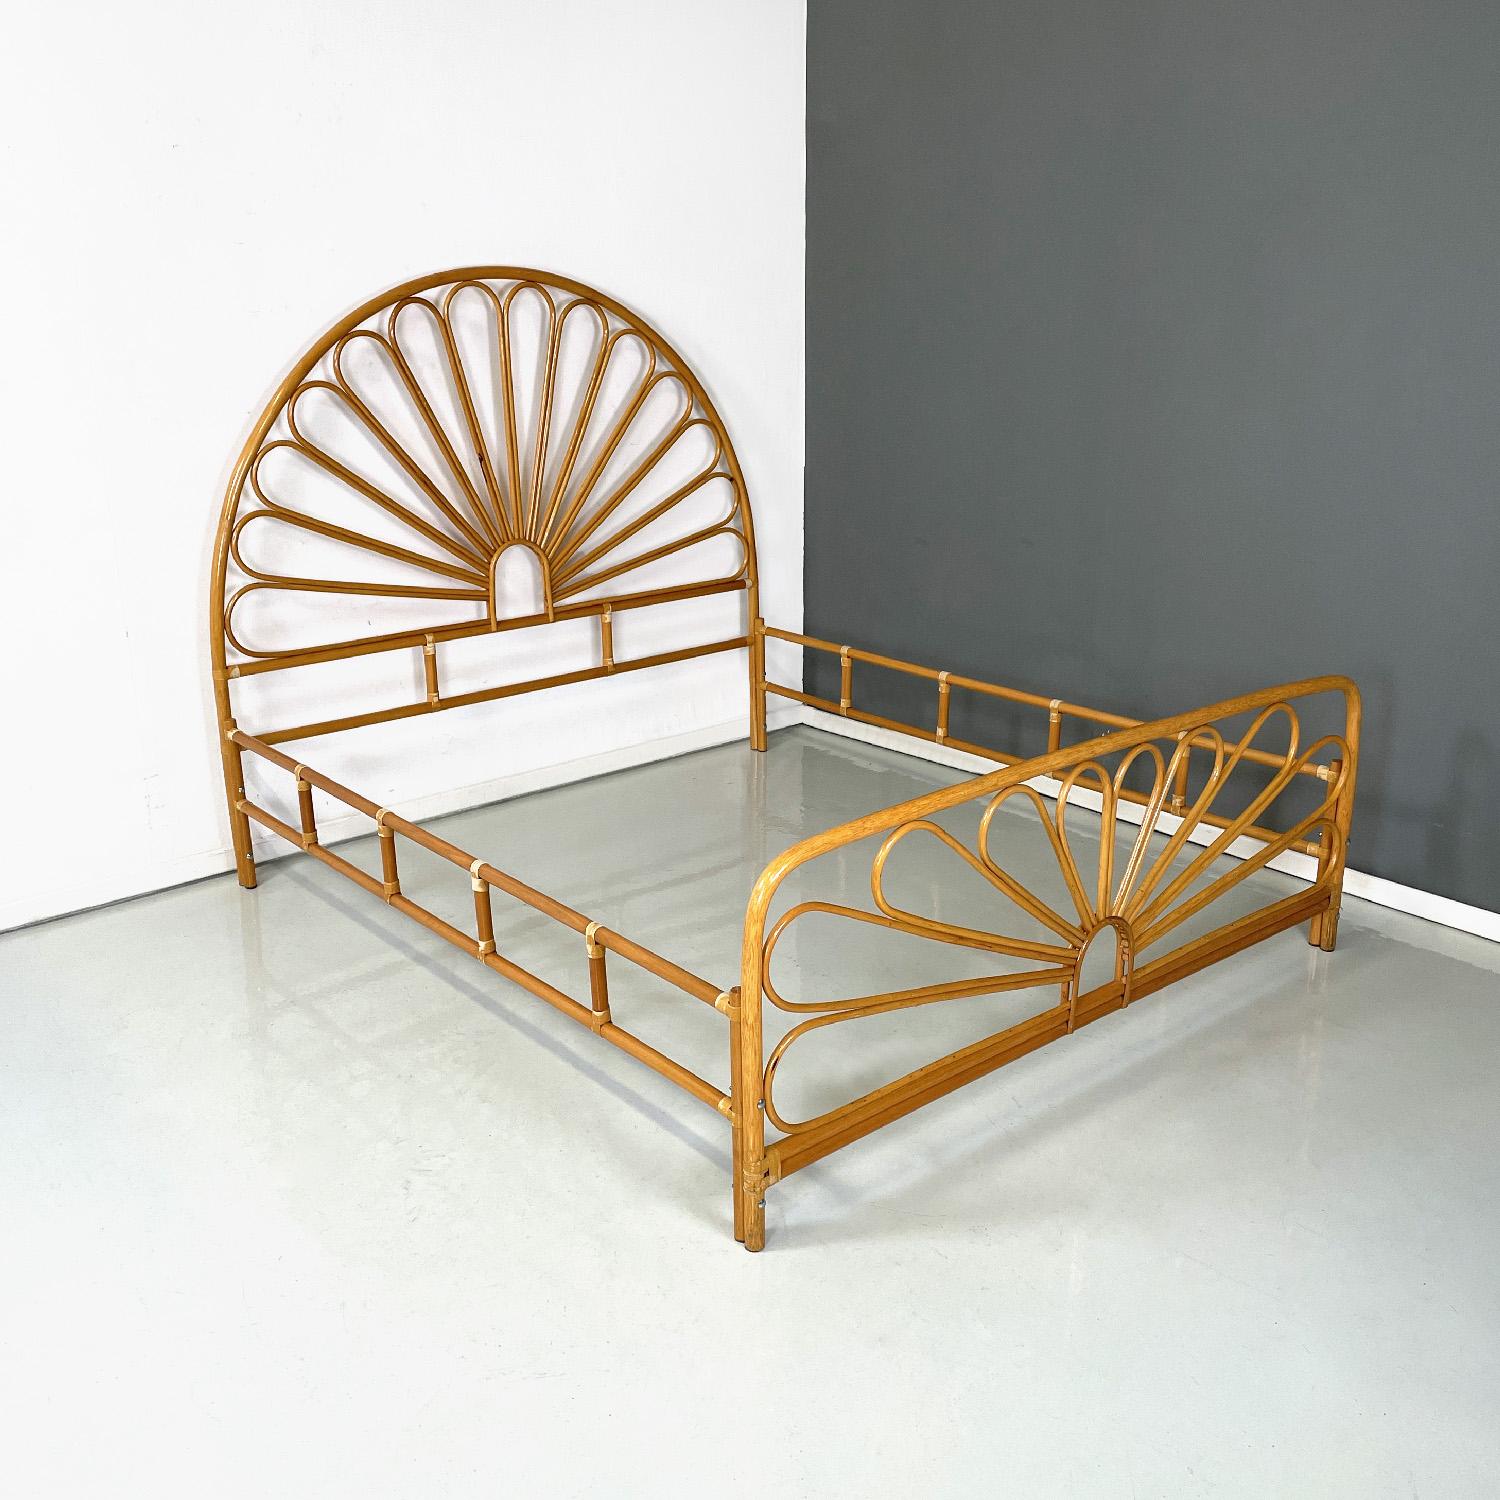 Italian mid-century modern bamboo double bed with decorations, 1950s
Bamboo double bed. The headboard is semicircular in shape while the final part is rectangular, both have curved decorative elements that recall the petals of a flower. On the sides